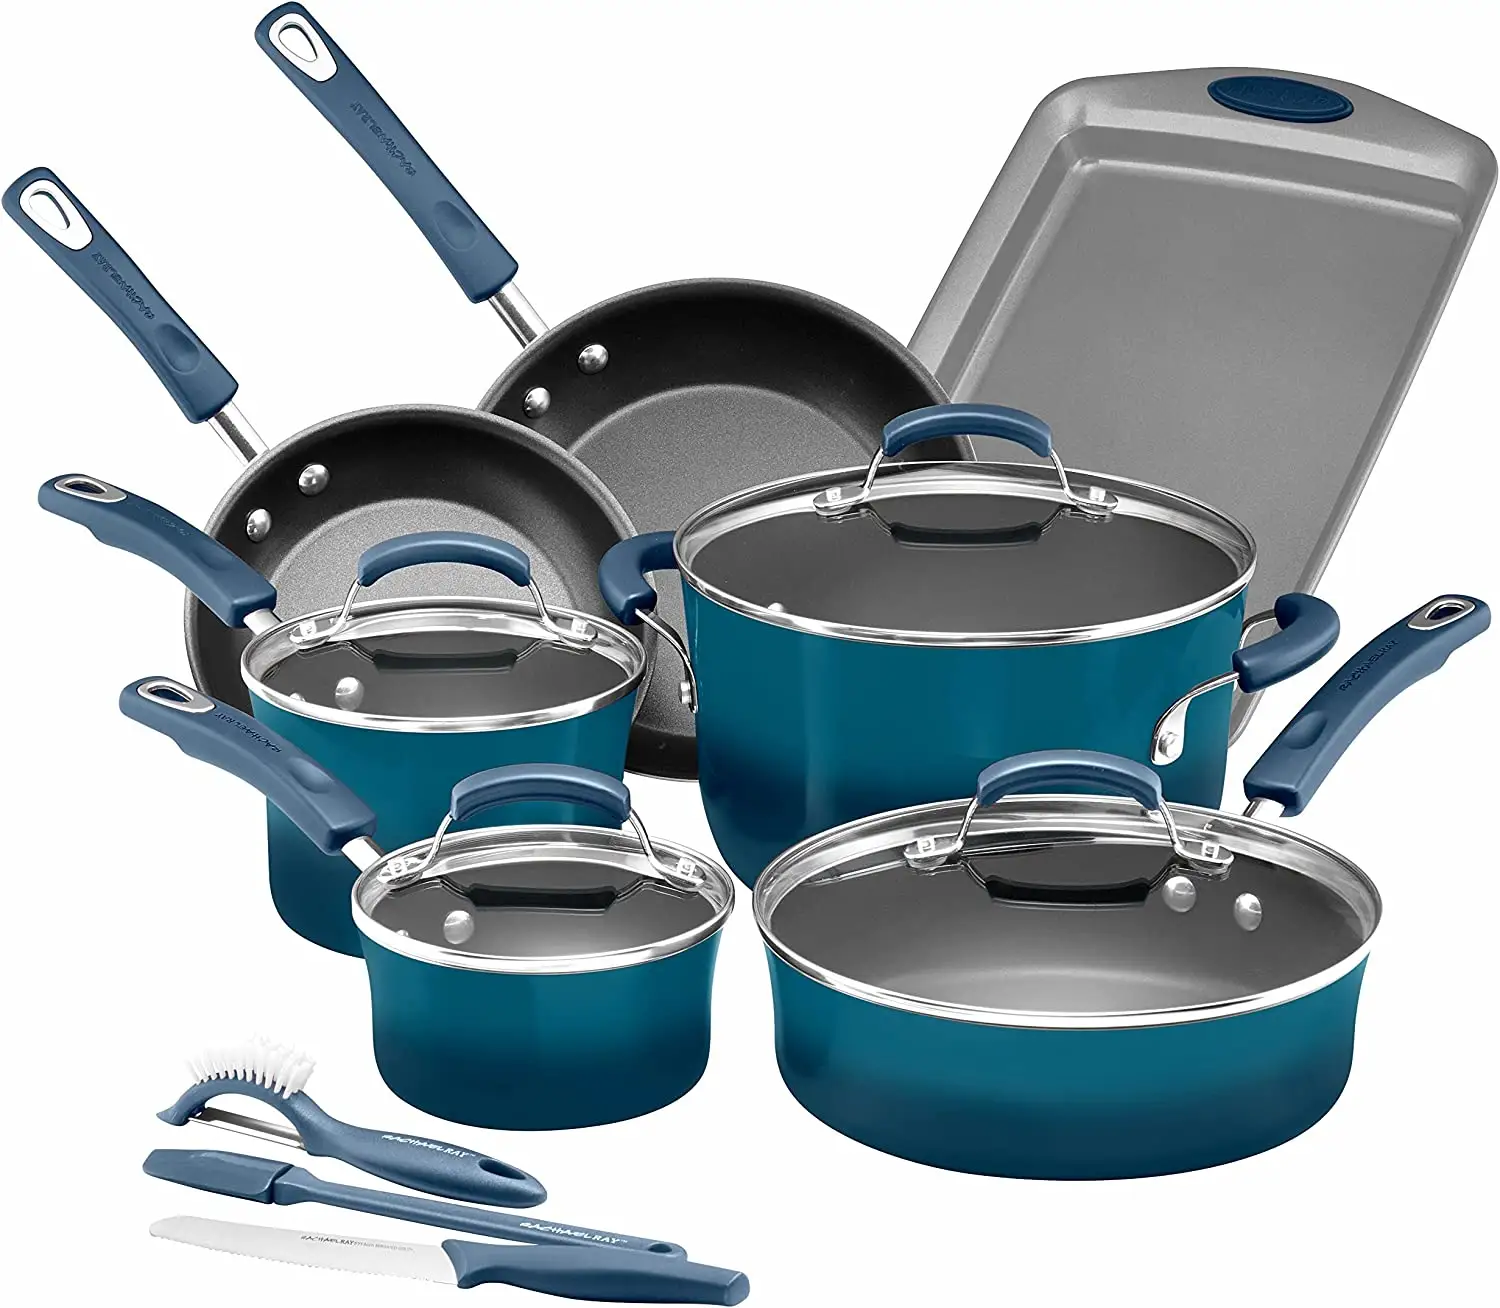 Hard Anodized Nonstick Cookware Pots and Pans Set